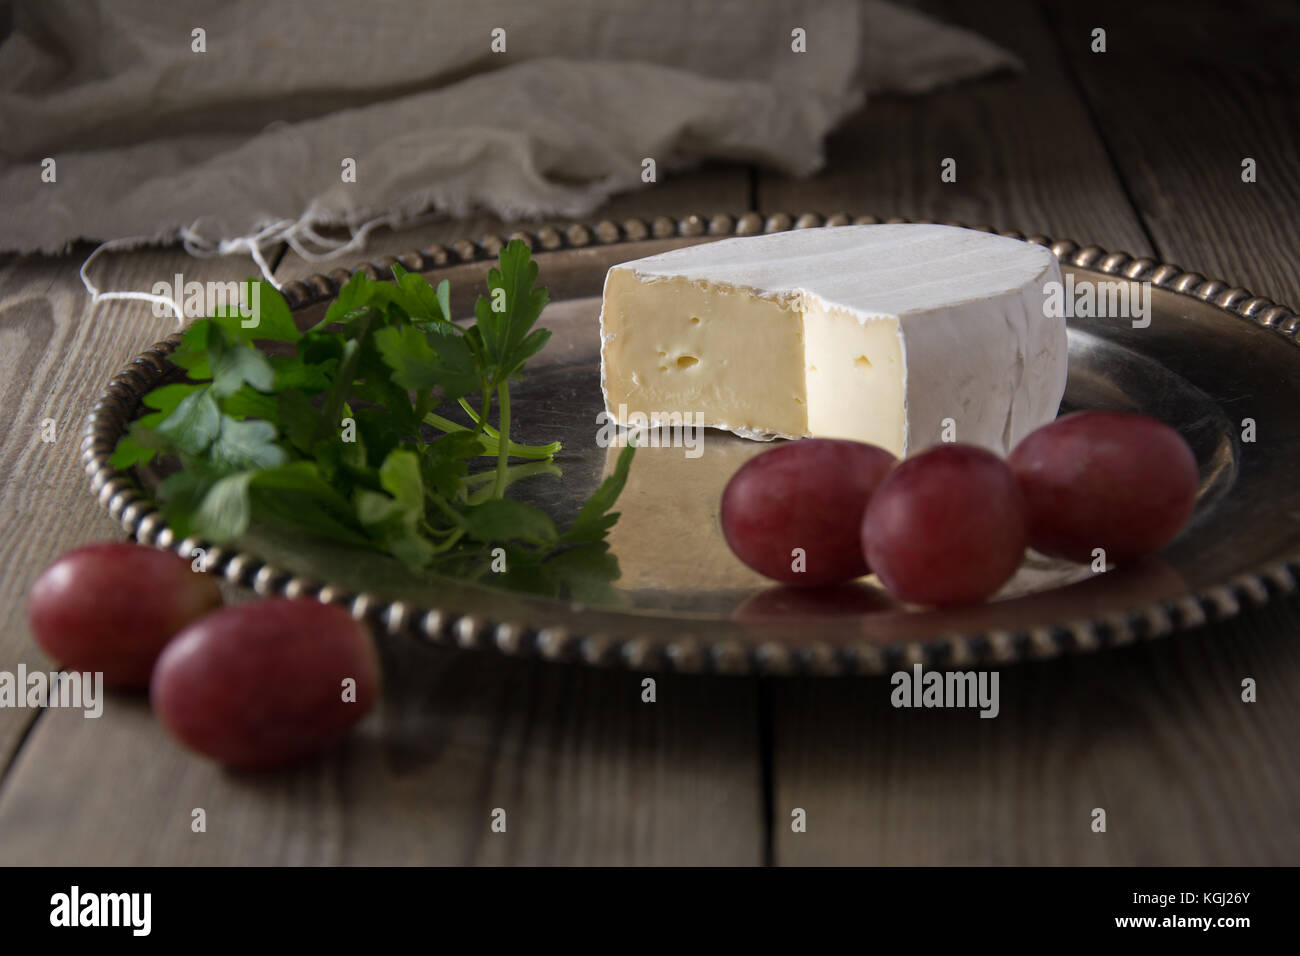 French camembert cheese on a silver platter with grapes and herbs Stock Photo